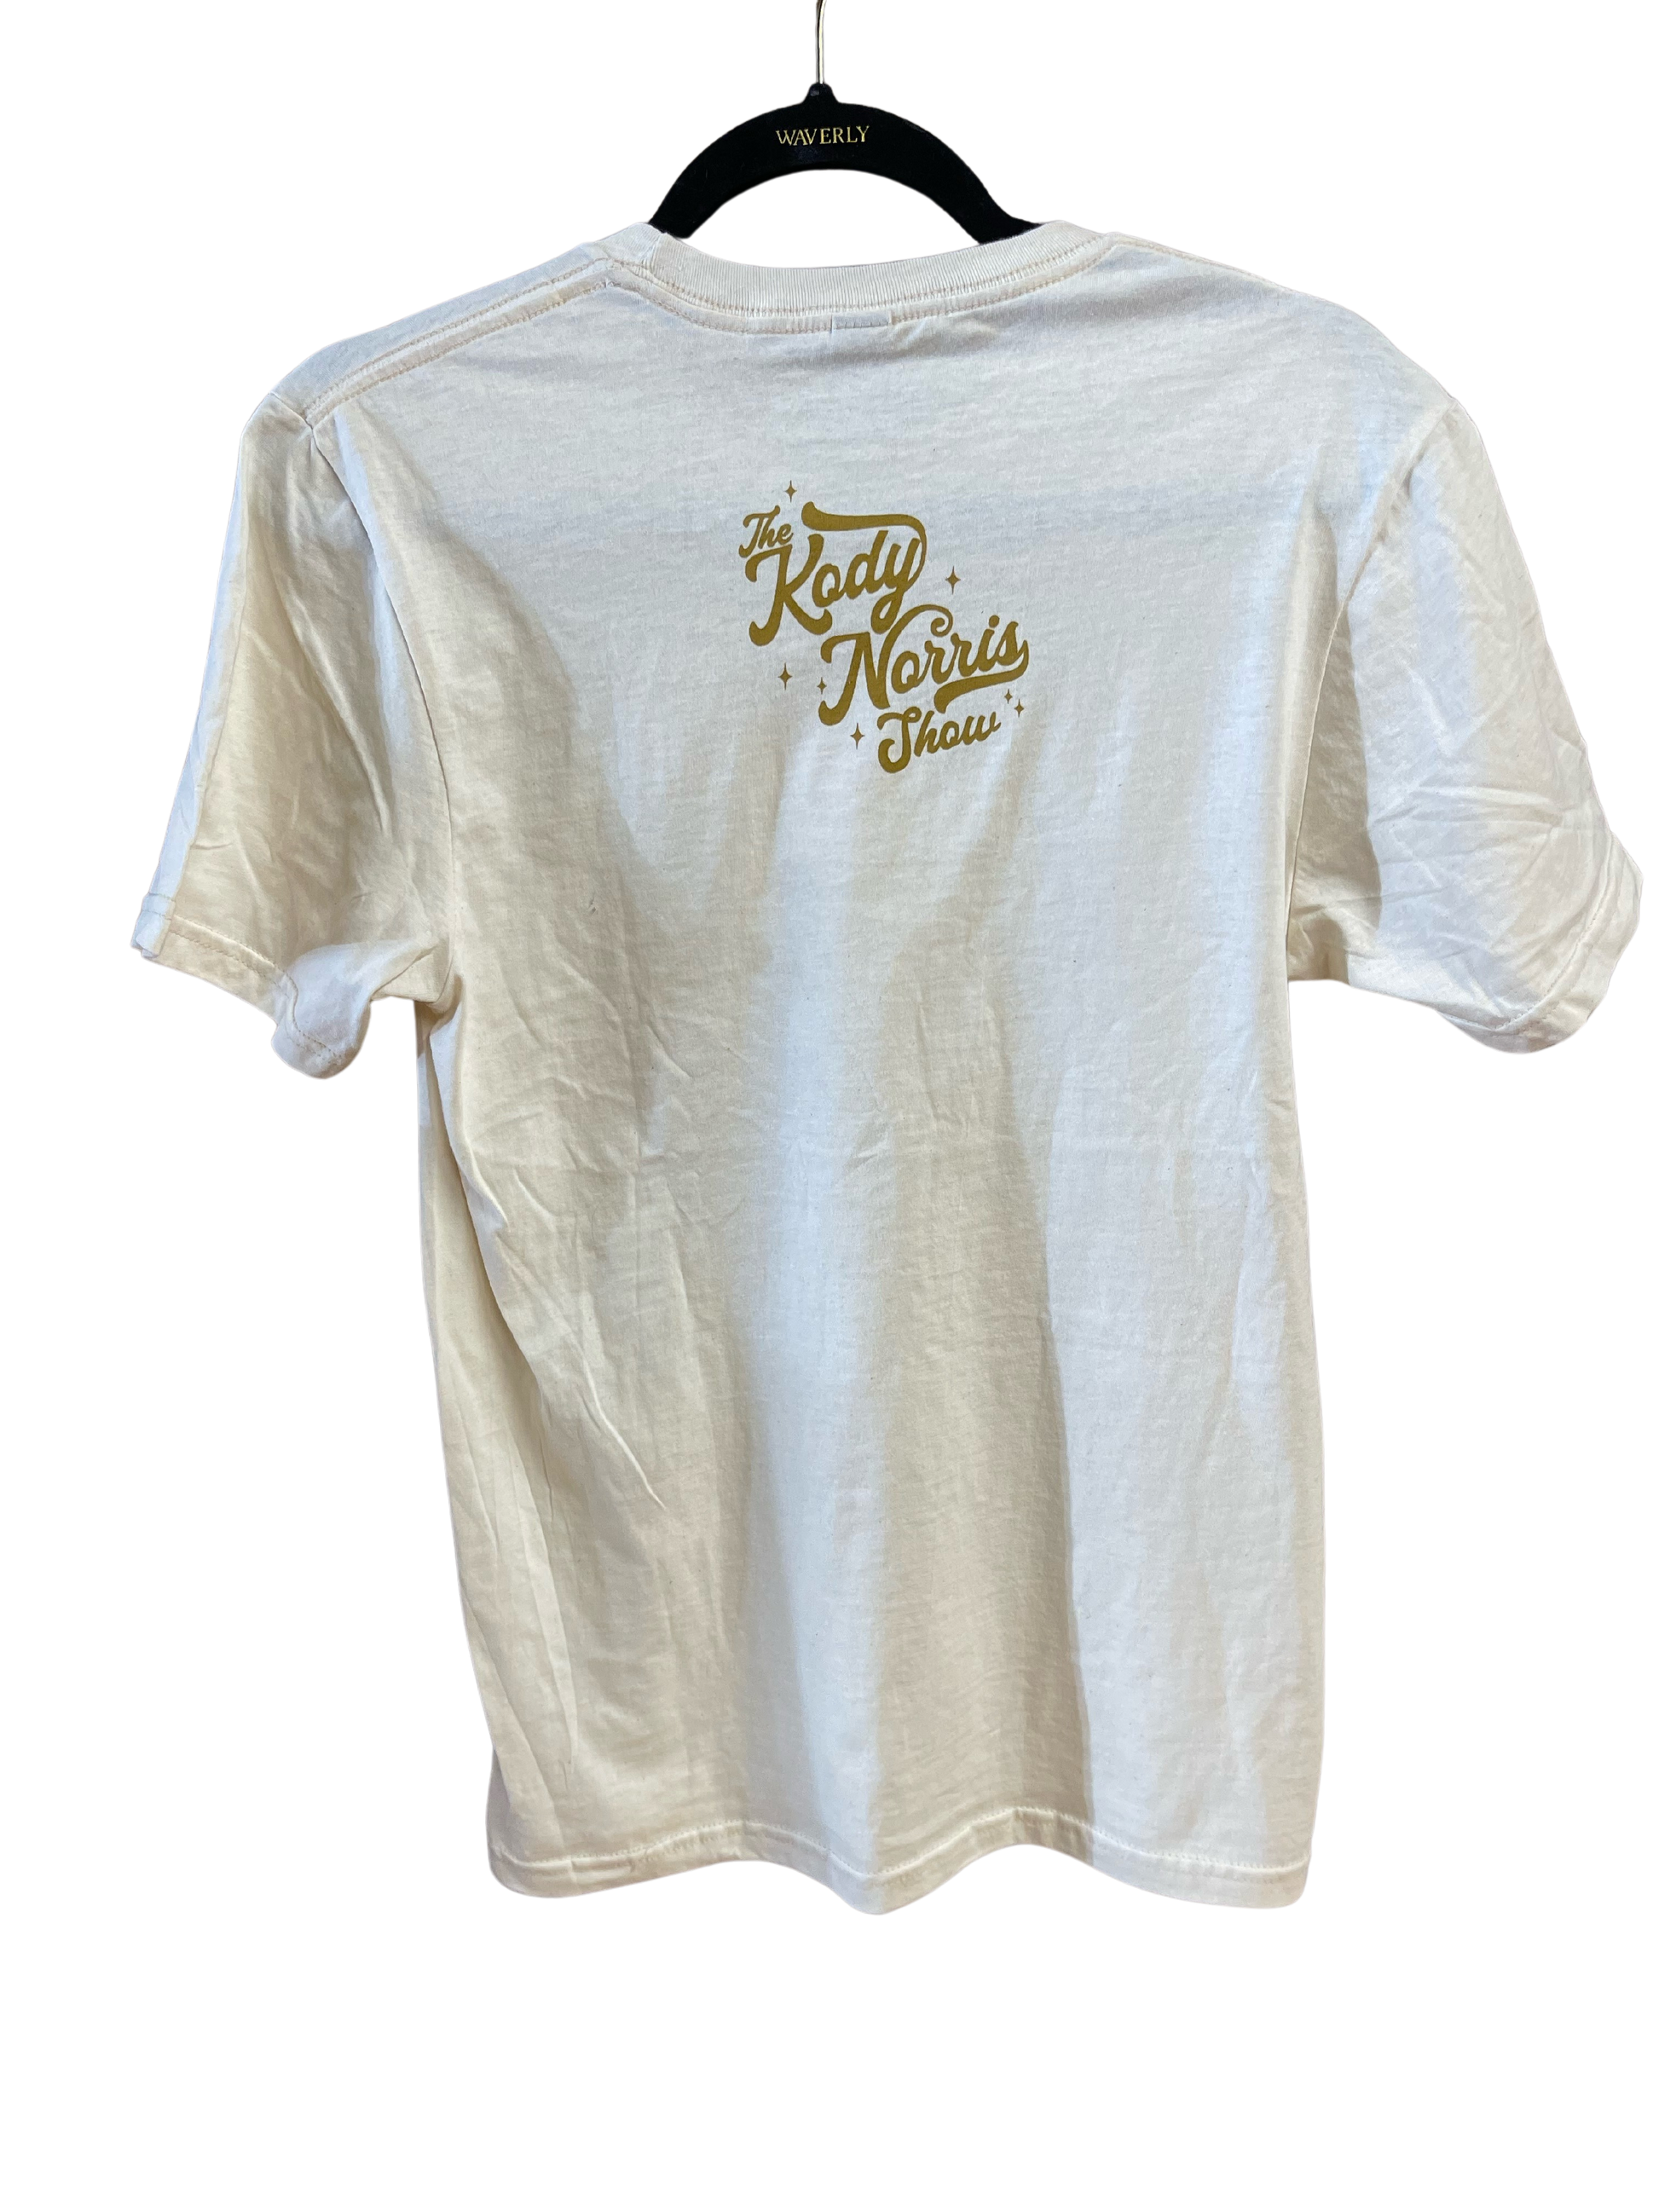 The Kody Norris Show Graphic Tee (Short Sleeve, Color Natural) Gildan Softstyle Tee. Available in Natural with Gold Lettering All Shirts include a secondary logo on the back collar.